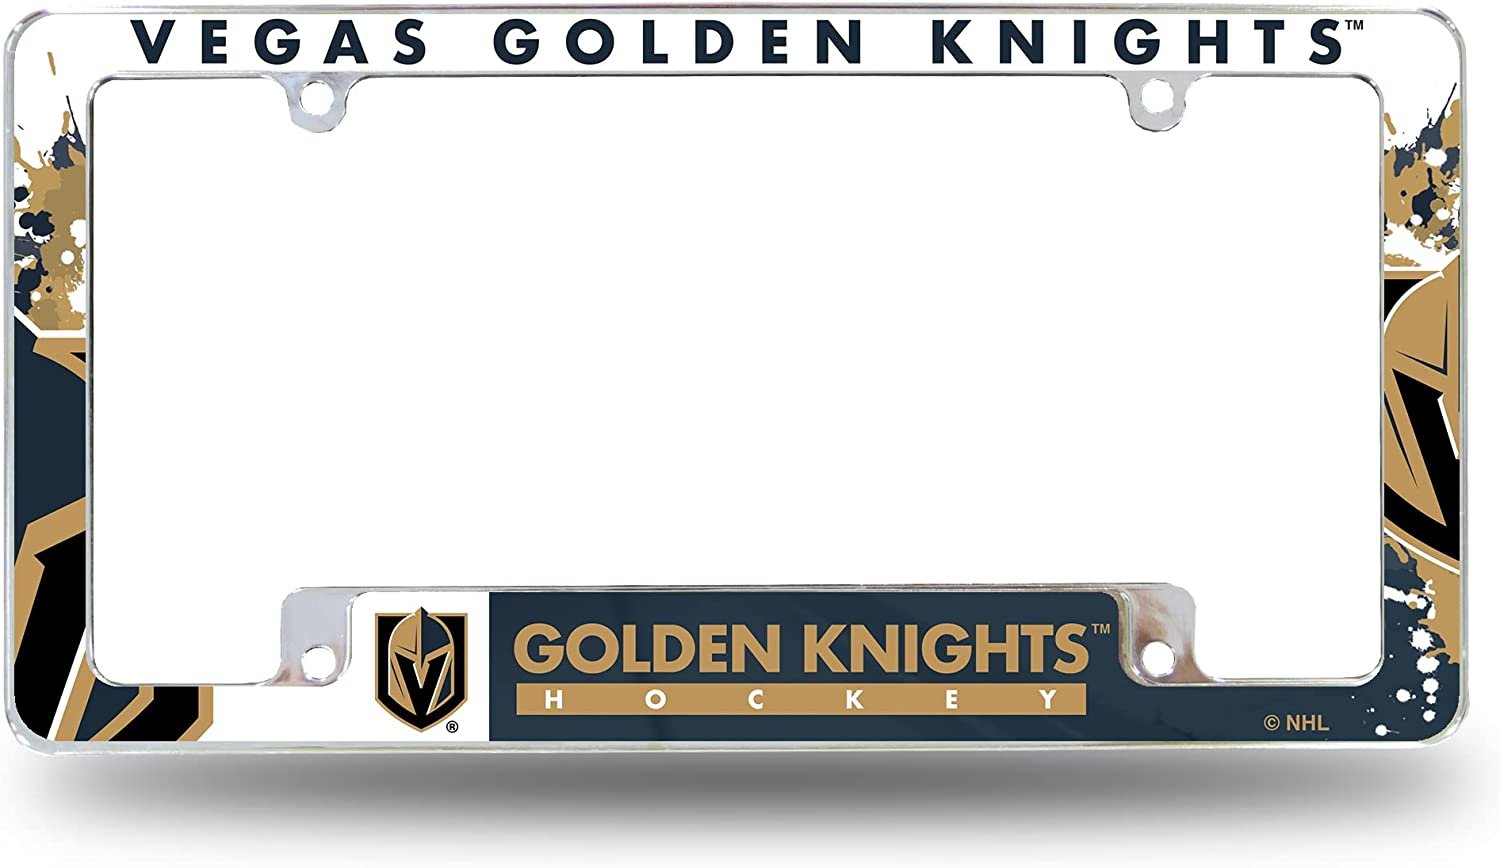 Vegas Golden Knights Metal License Plate Frame Chrome Tag Cover All Over Design 6x12 Inch